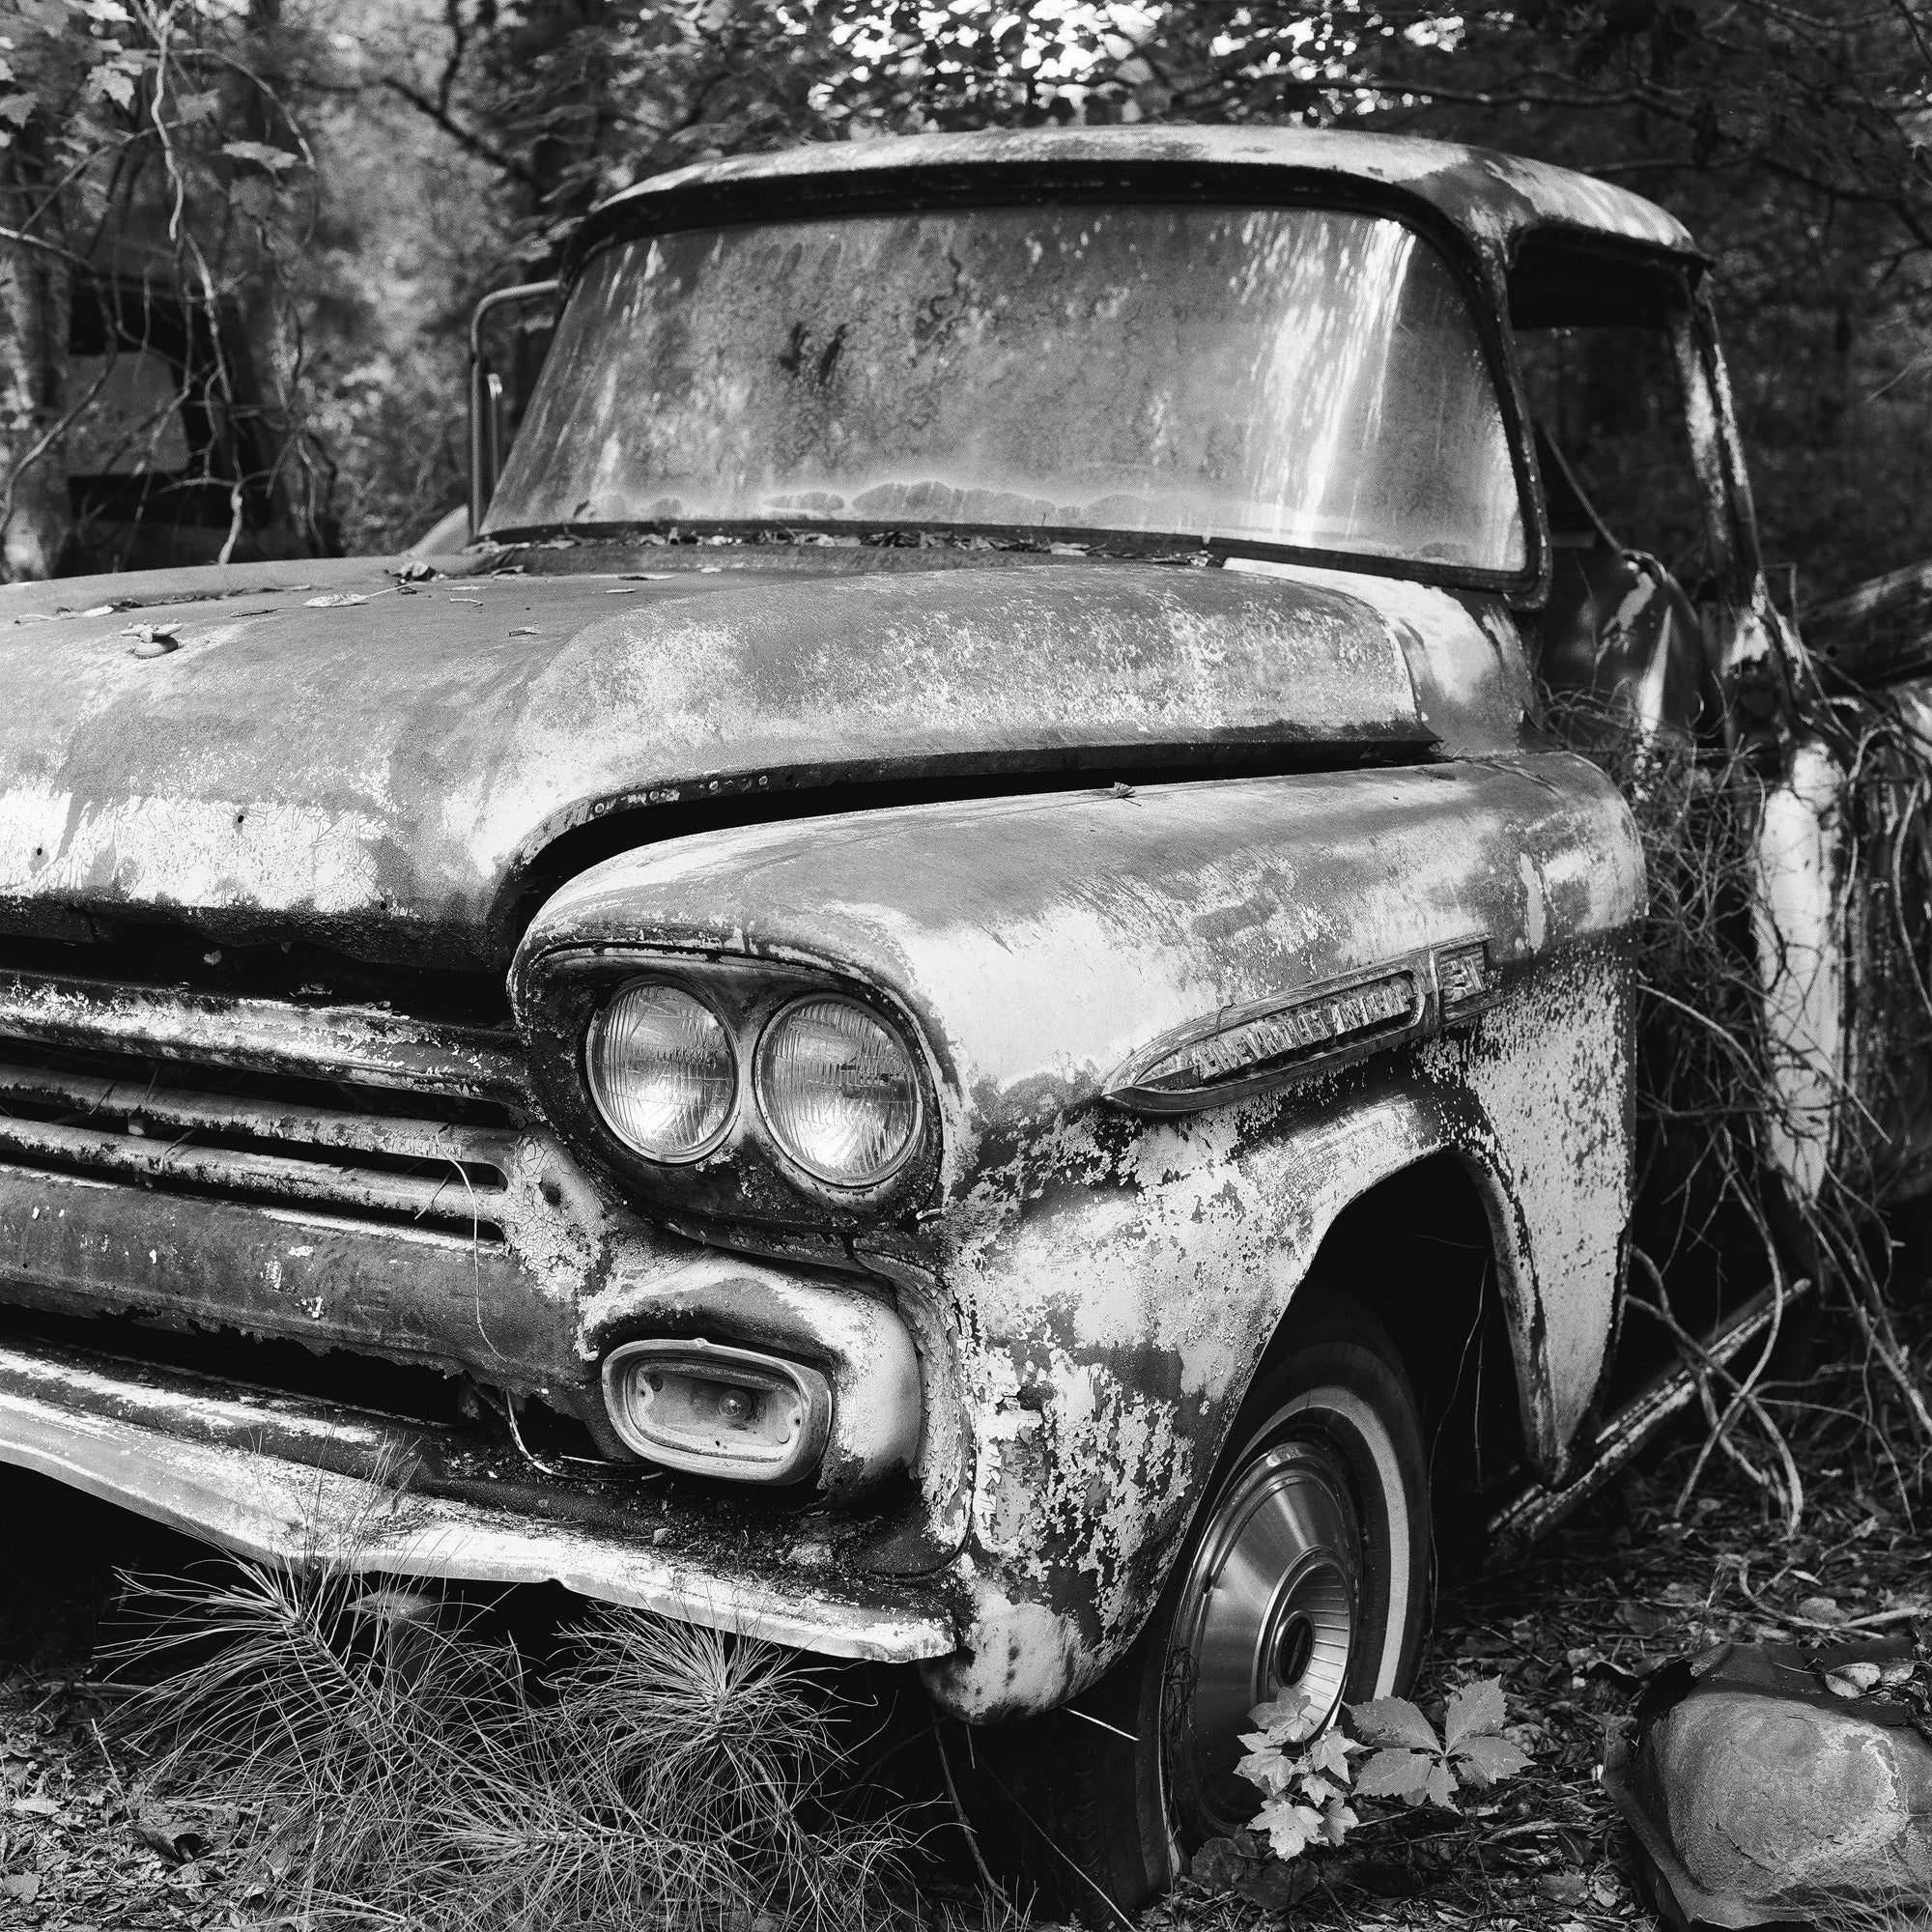 Rusty Antique Chevrolet Pickup Truck - Black and White Photograph by Keith Dotson. Click to buy a fine art print.